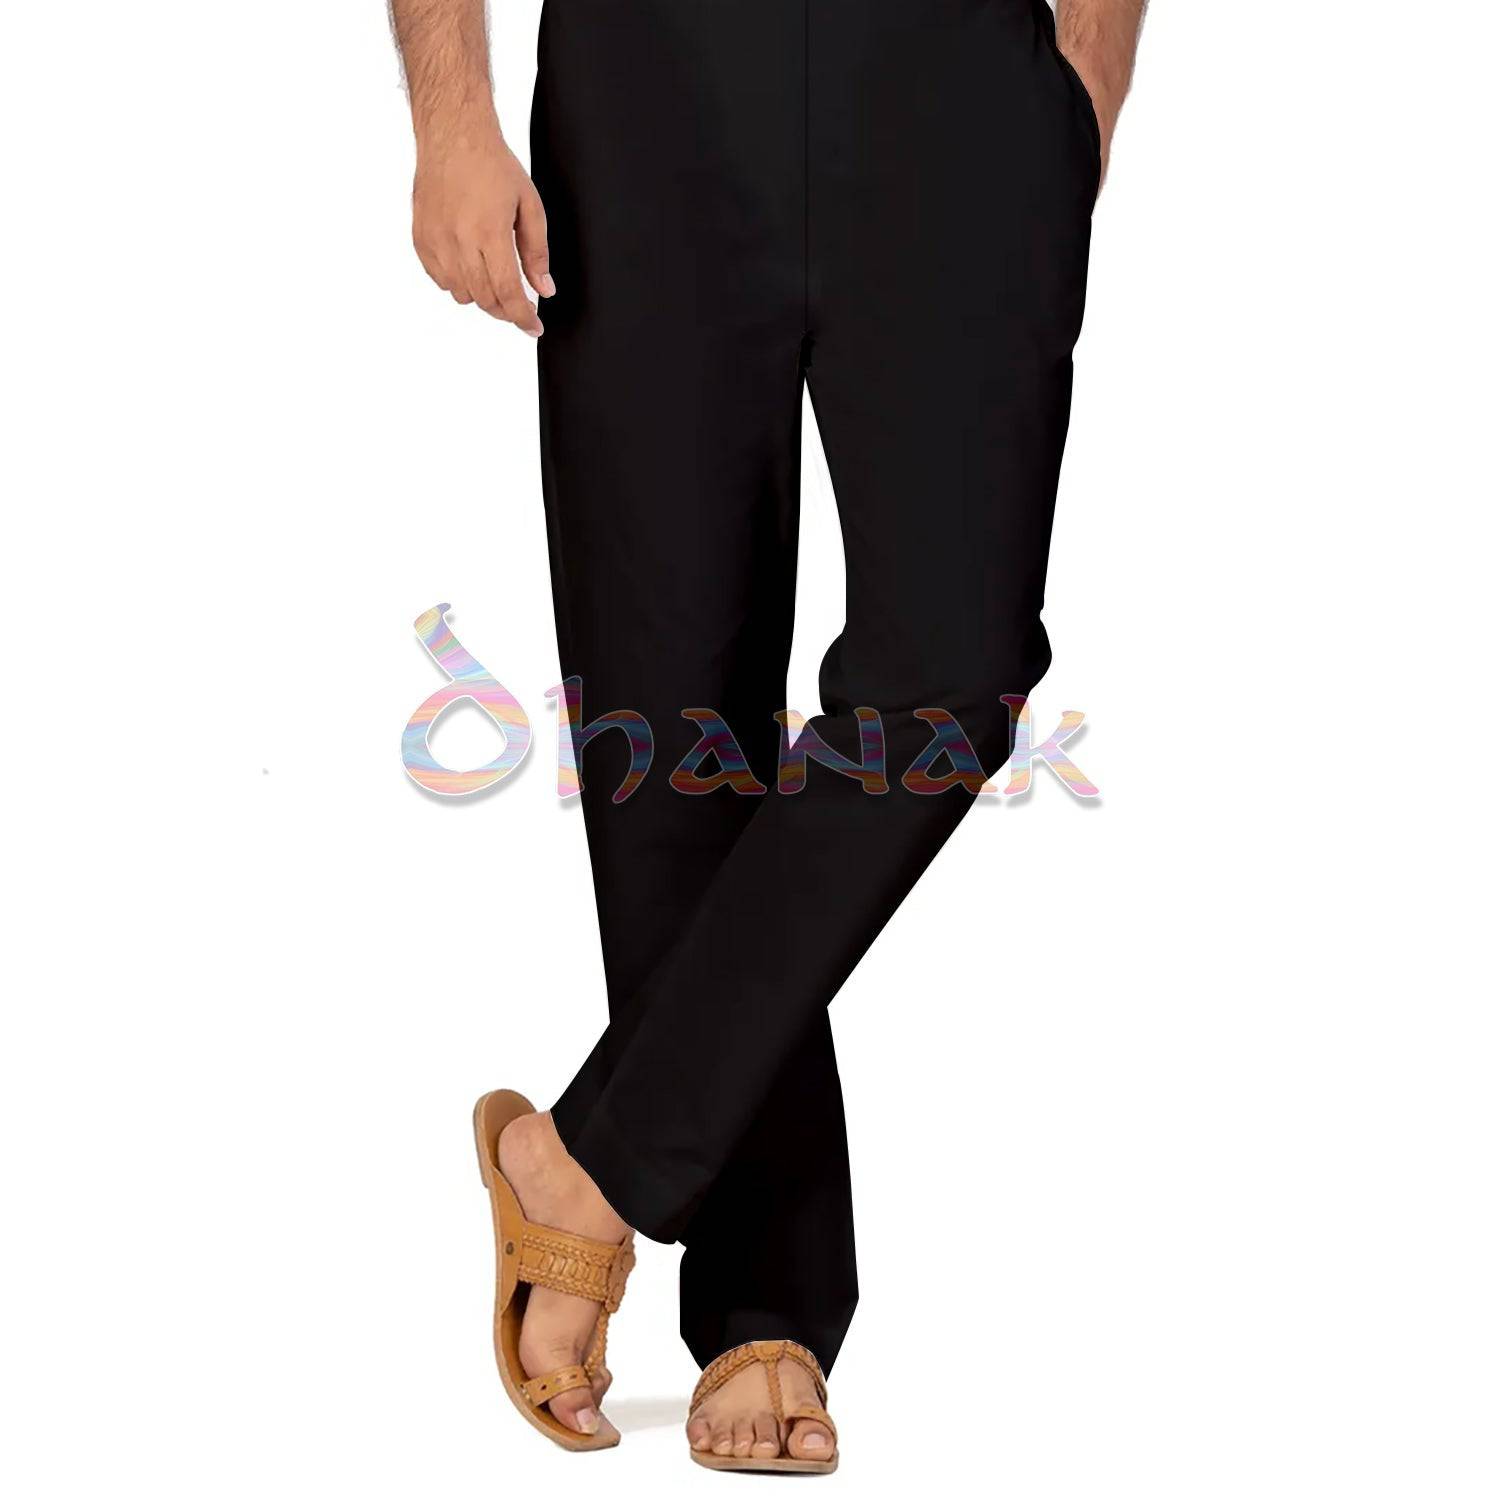 Unisex - Basic Pajama / Trousers with Pockets in Cotton - MTC01 - Dhanak Boutique